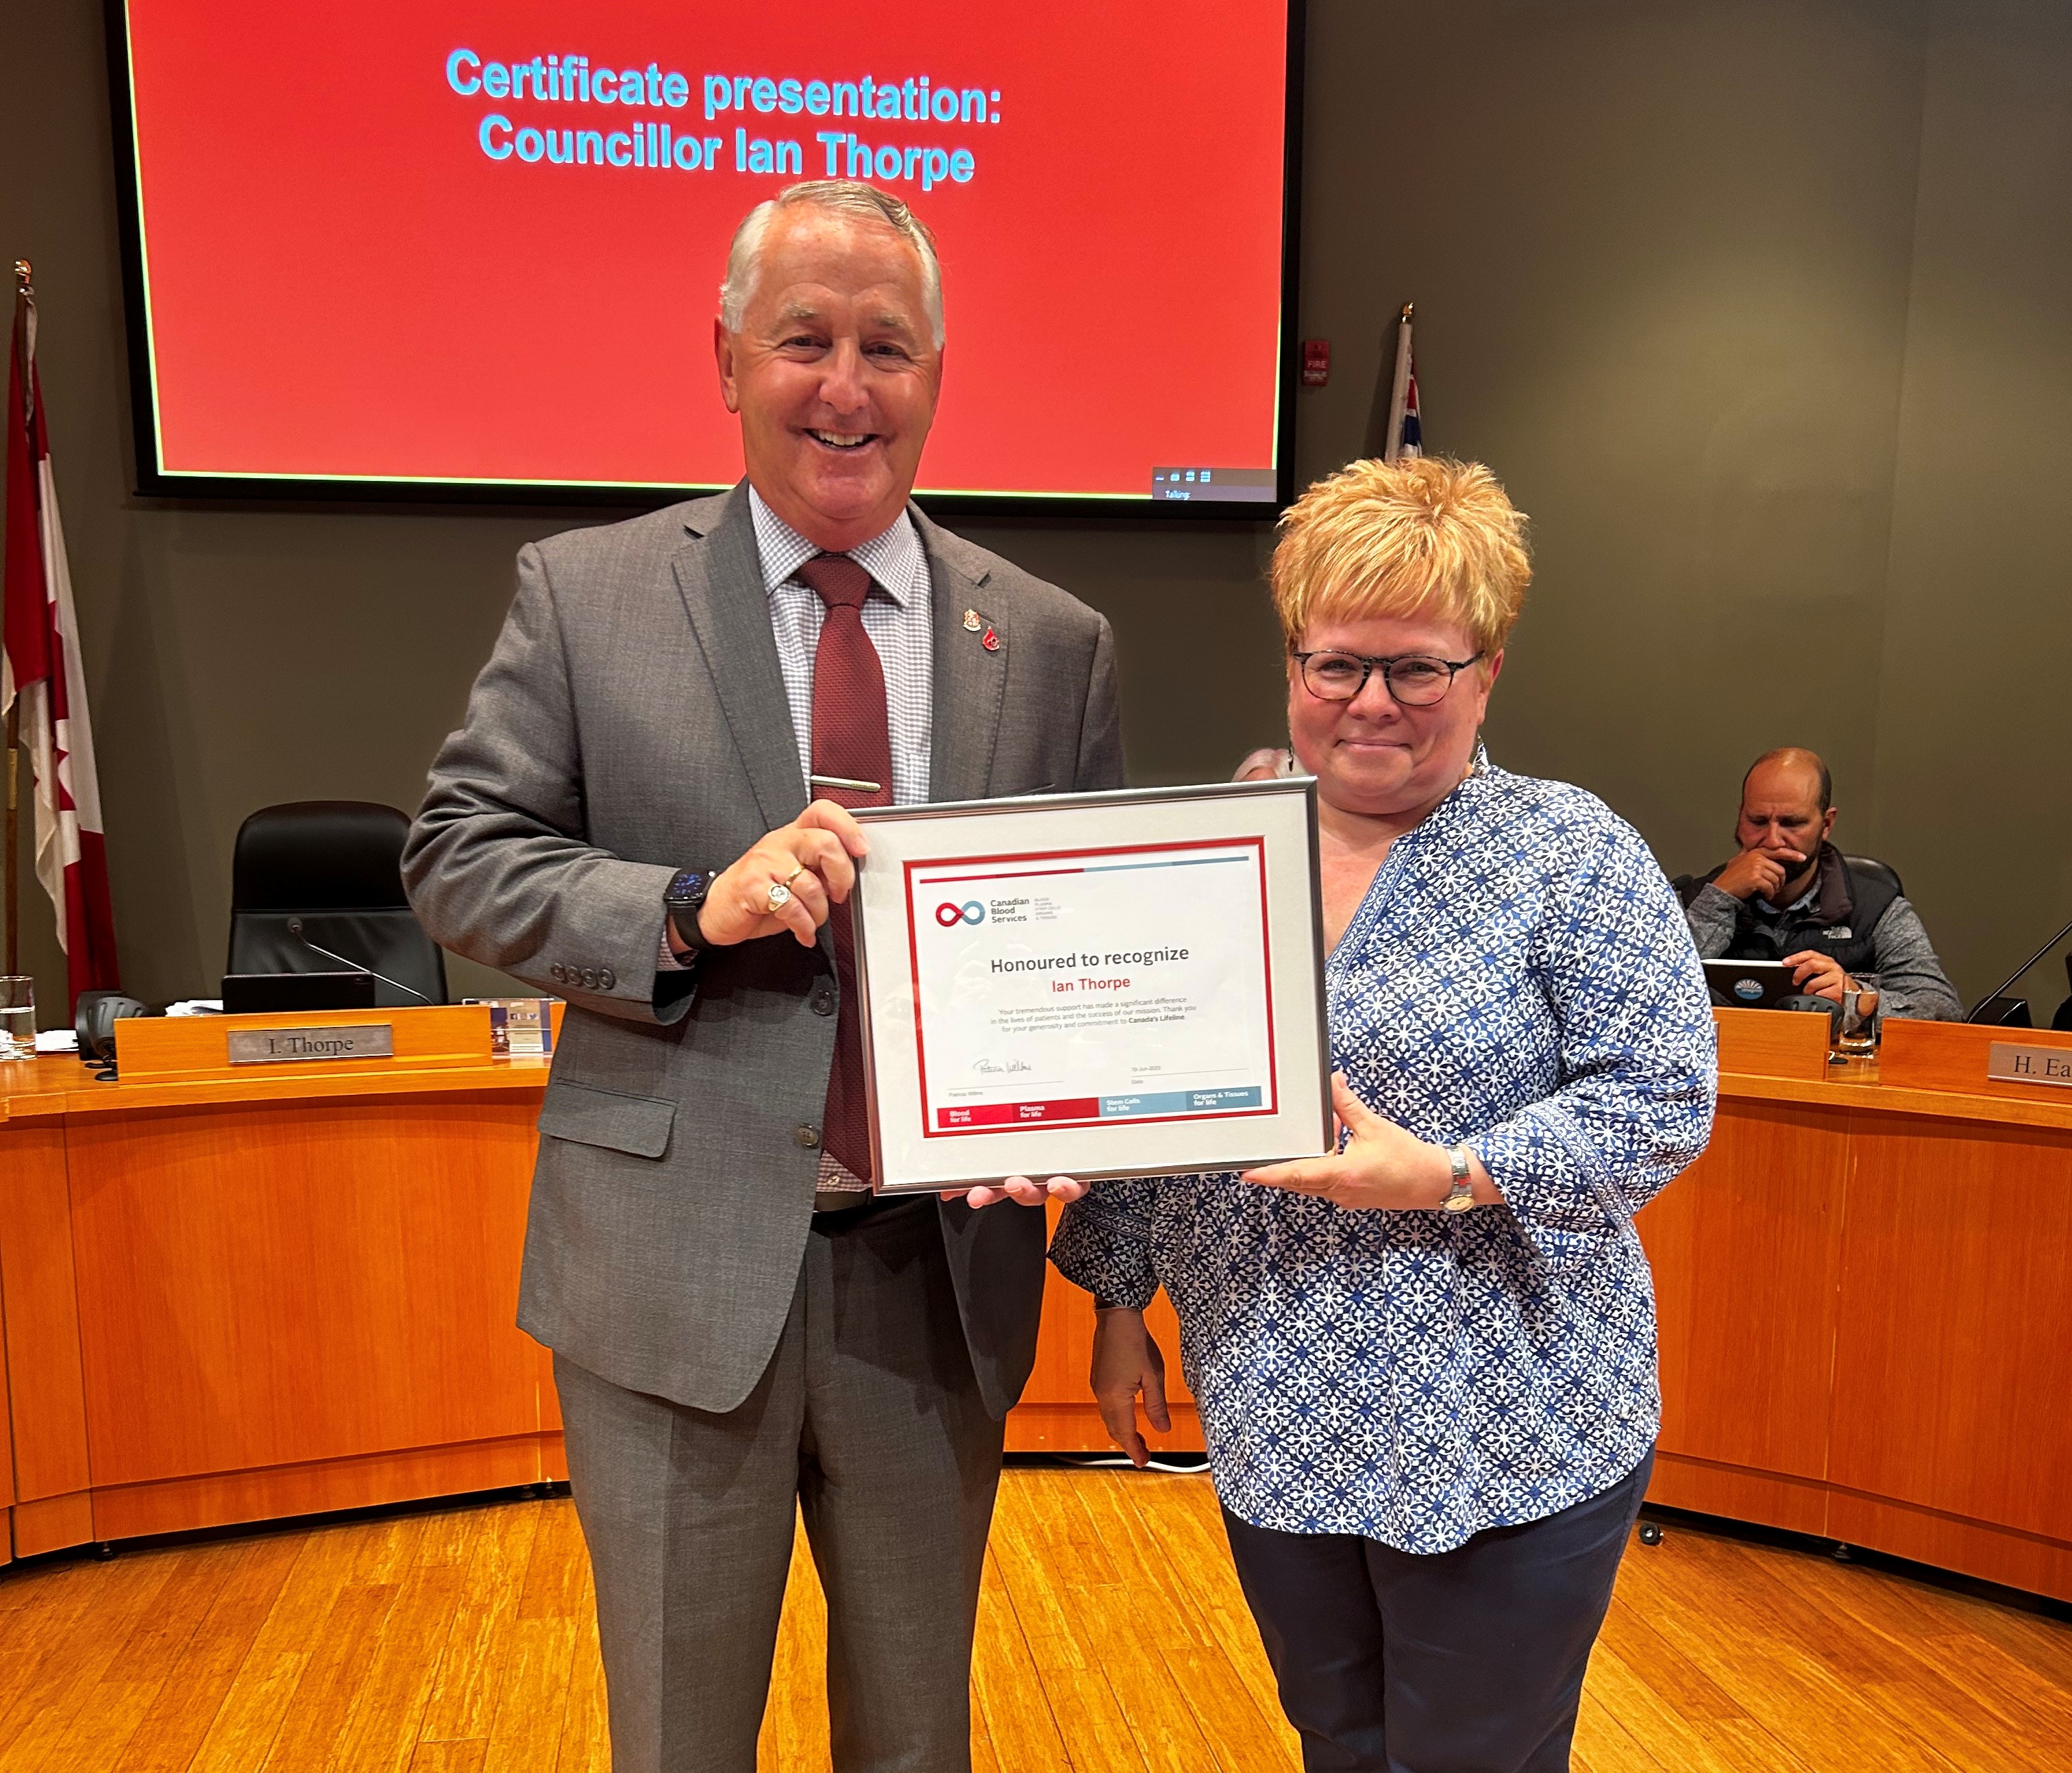 Councillor Ian Thorpe presented with certificate of recognition from Canadian Blood Services